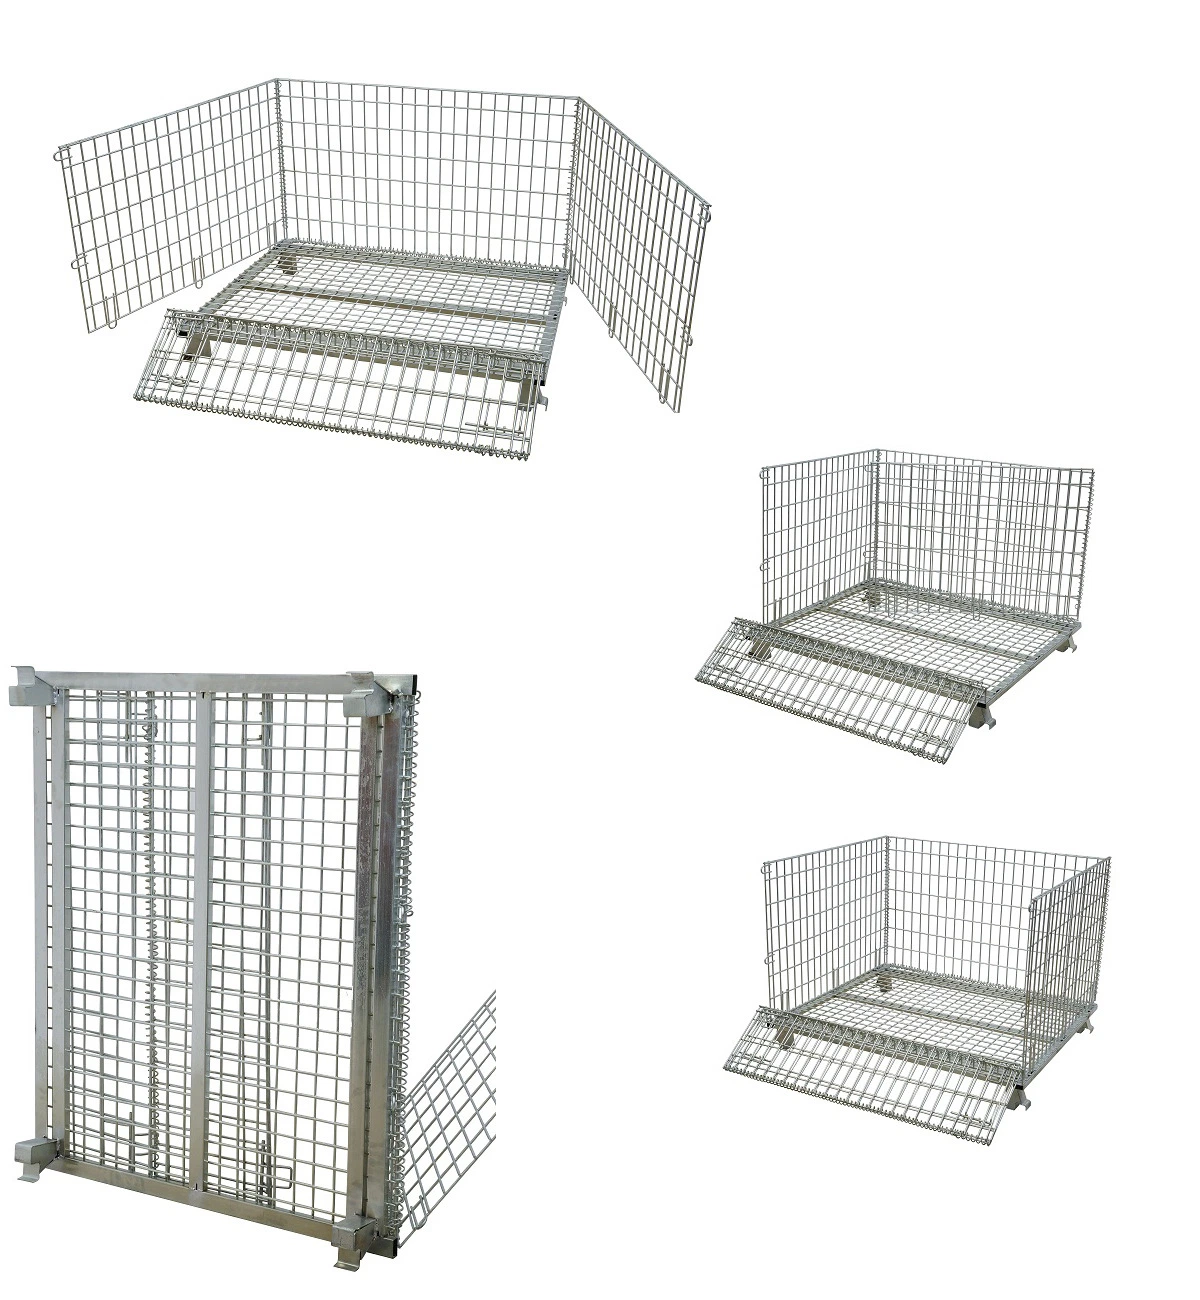 Multi-Specification Collapsible Steel Wire Mesh Container Storage Used for Auto Parts